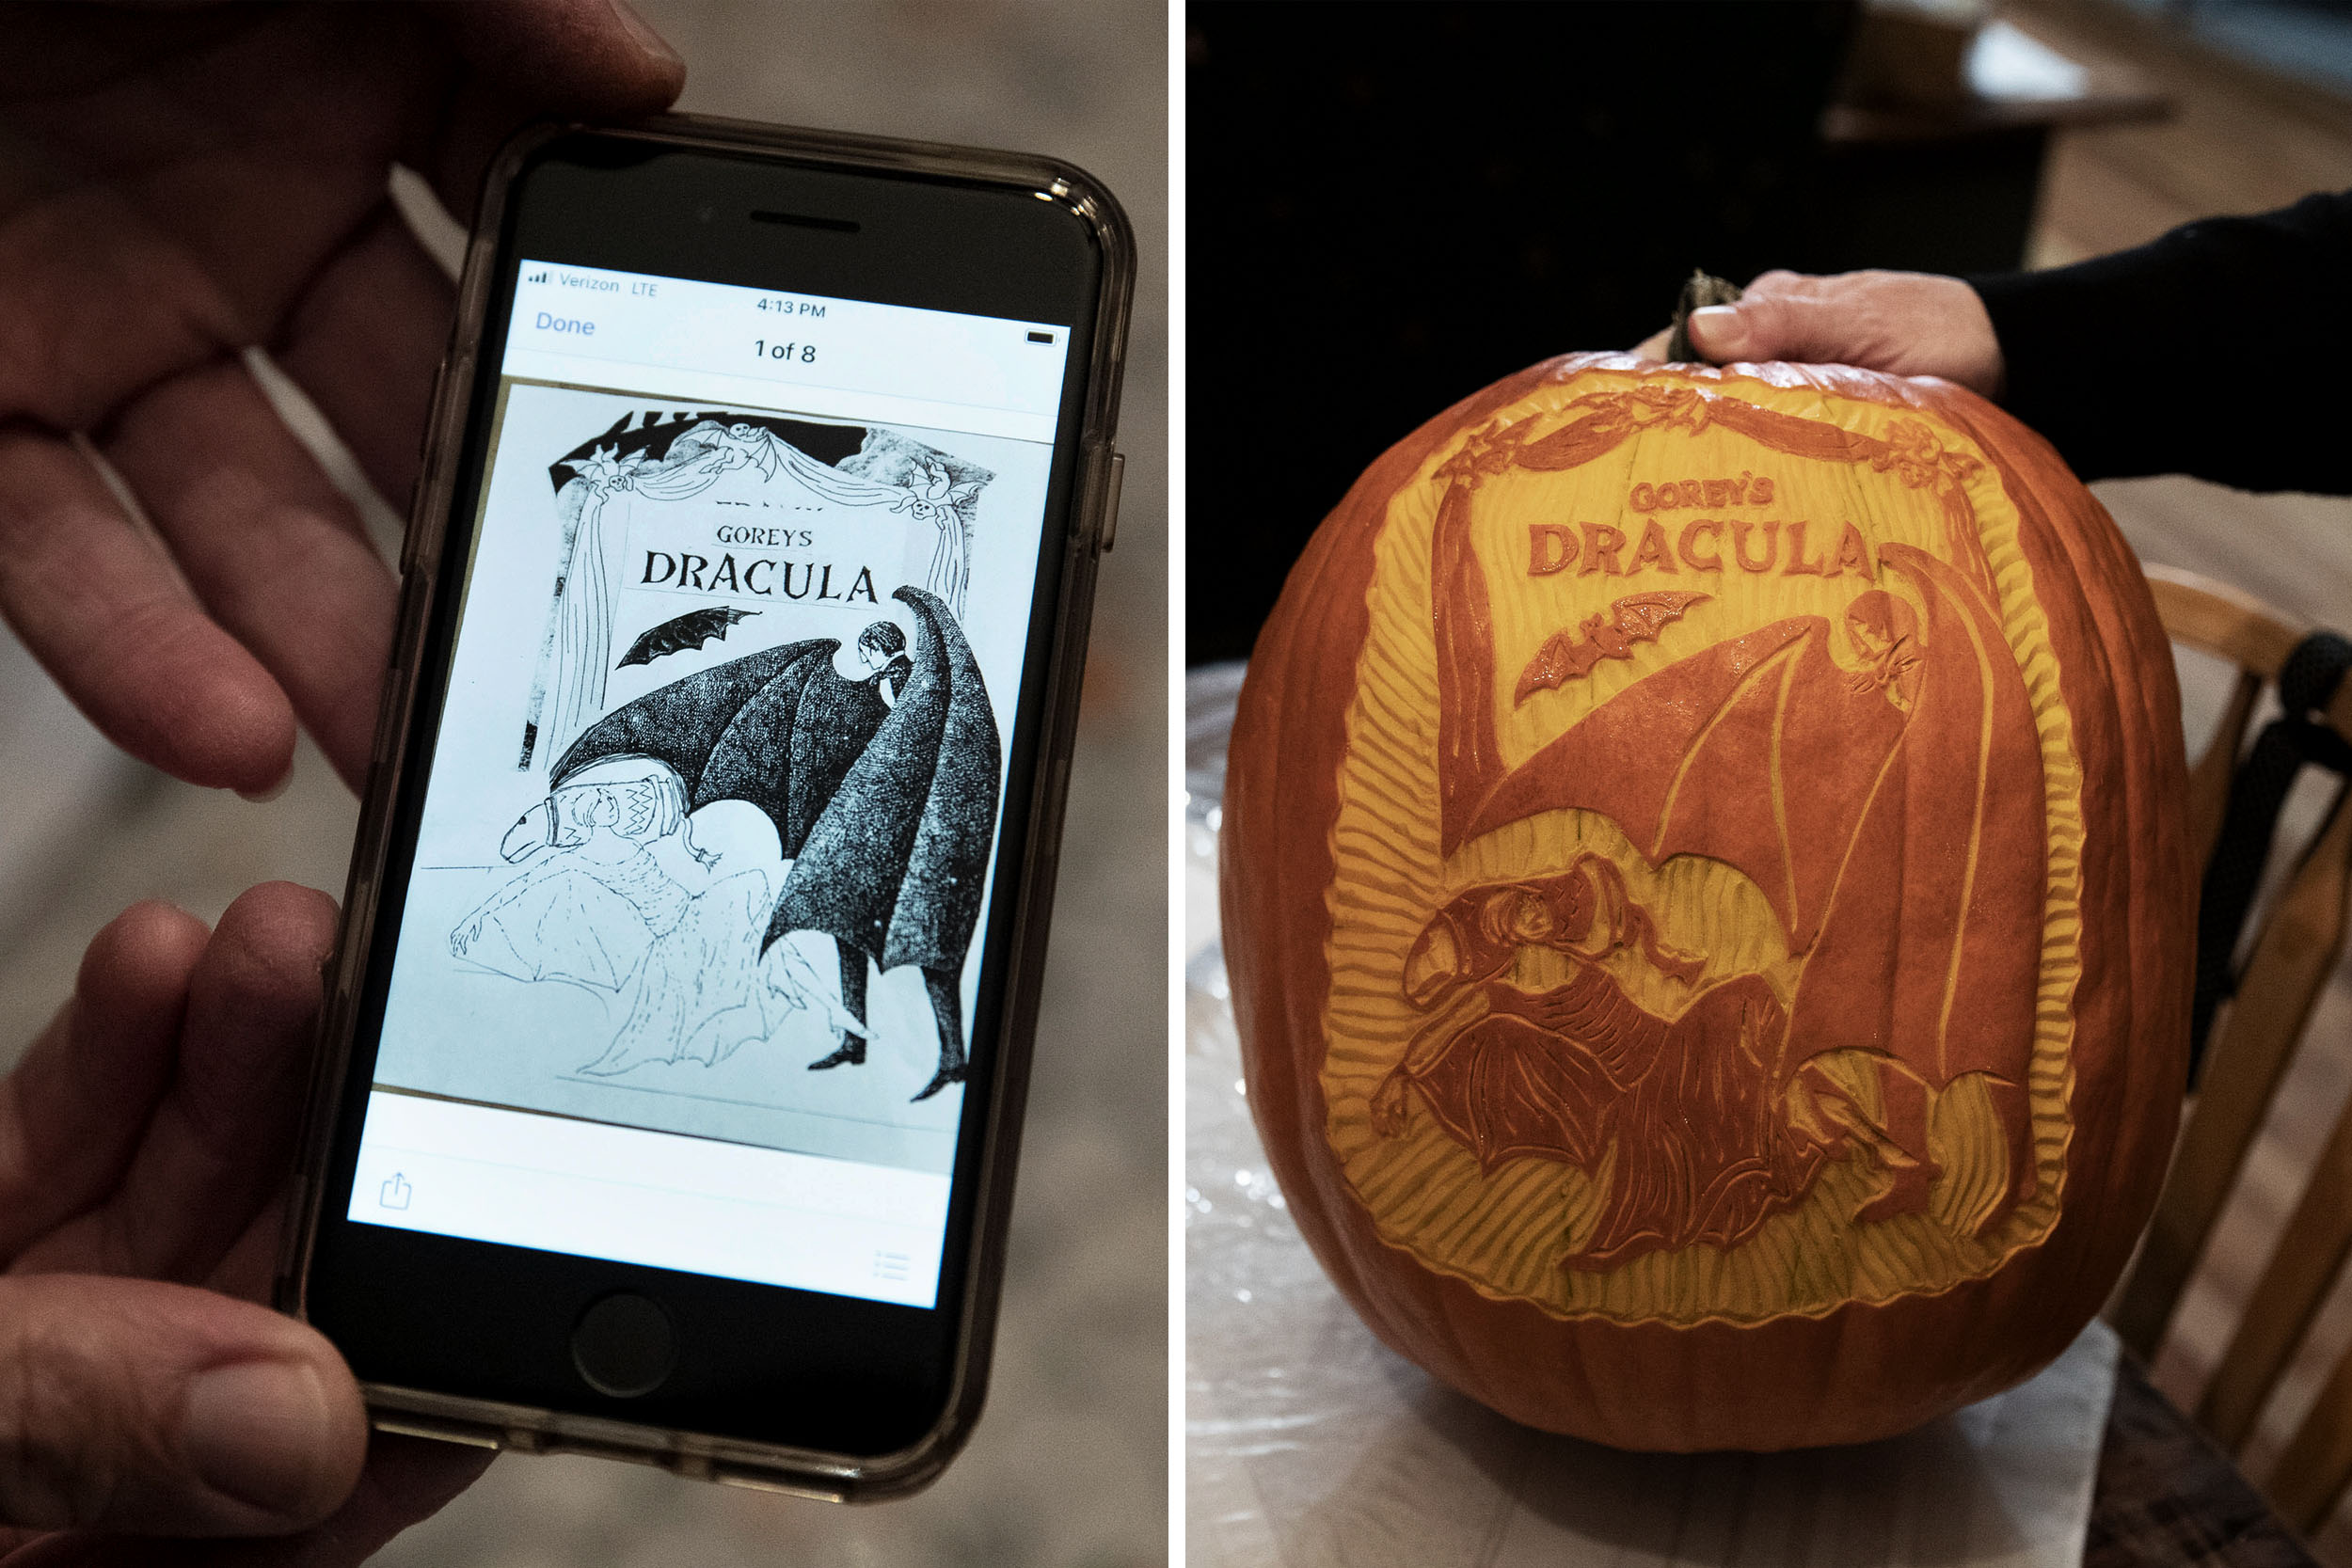 left: image of the playbill of dracula. Right: pumpkin carving of the playbill